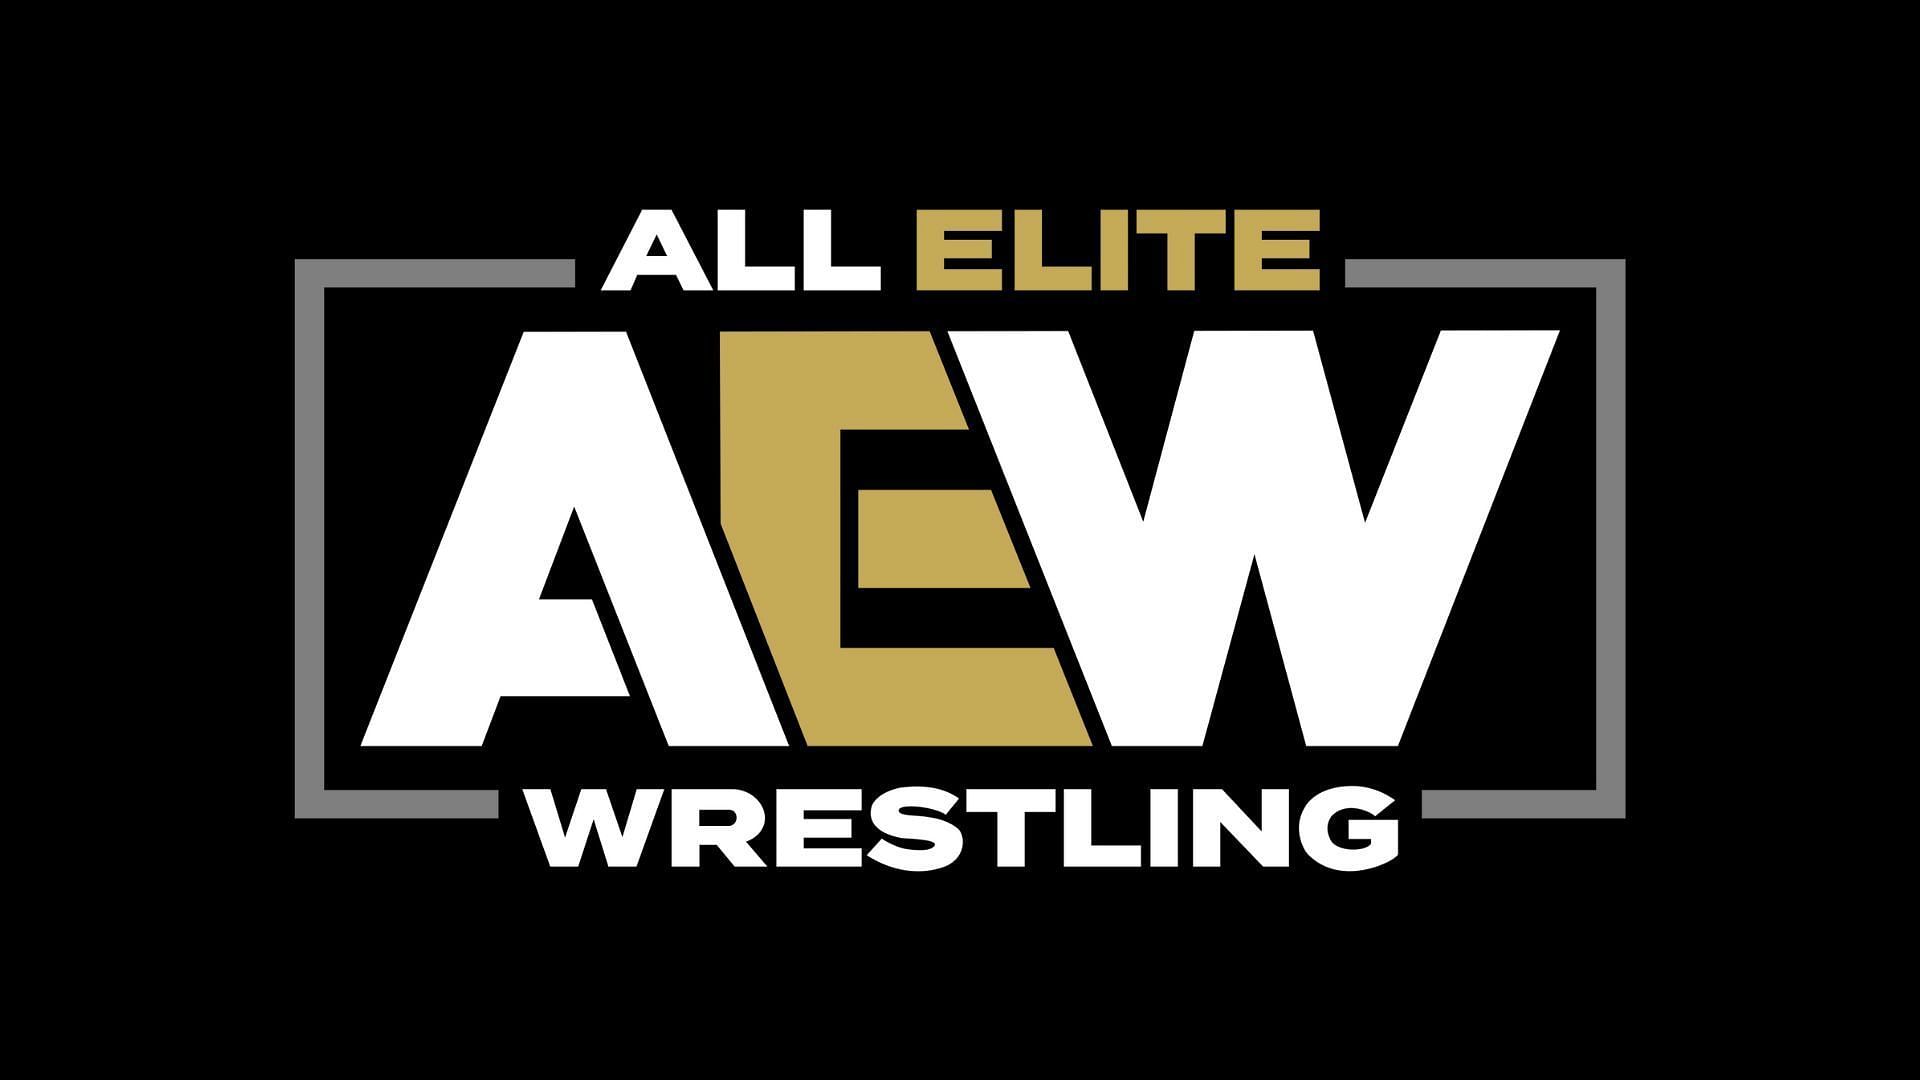 AEW name was given no explanation before his release